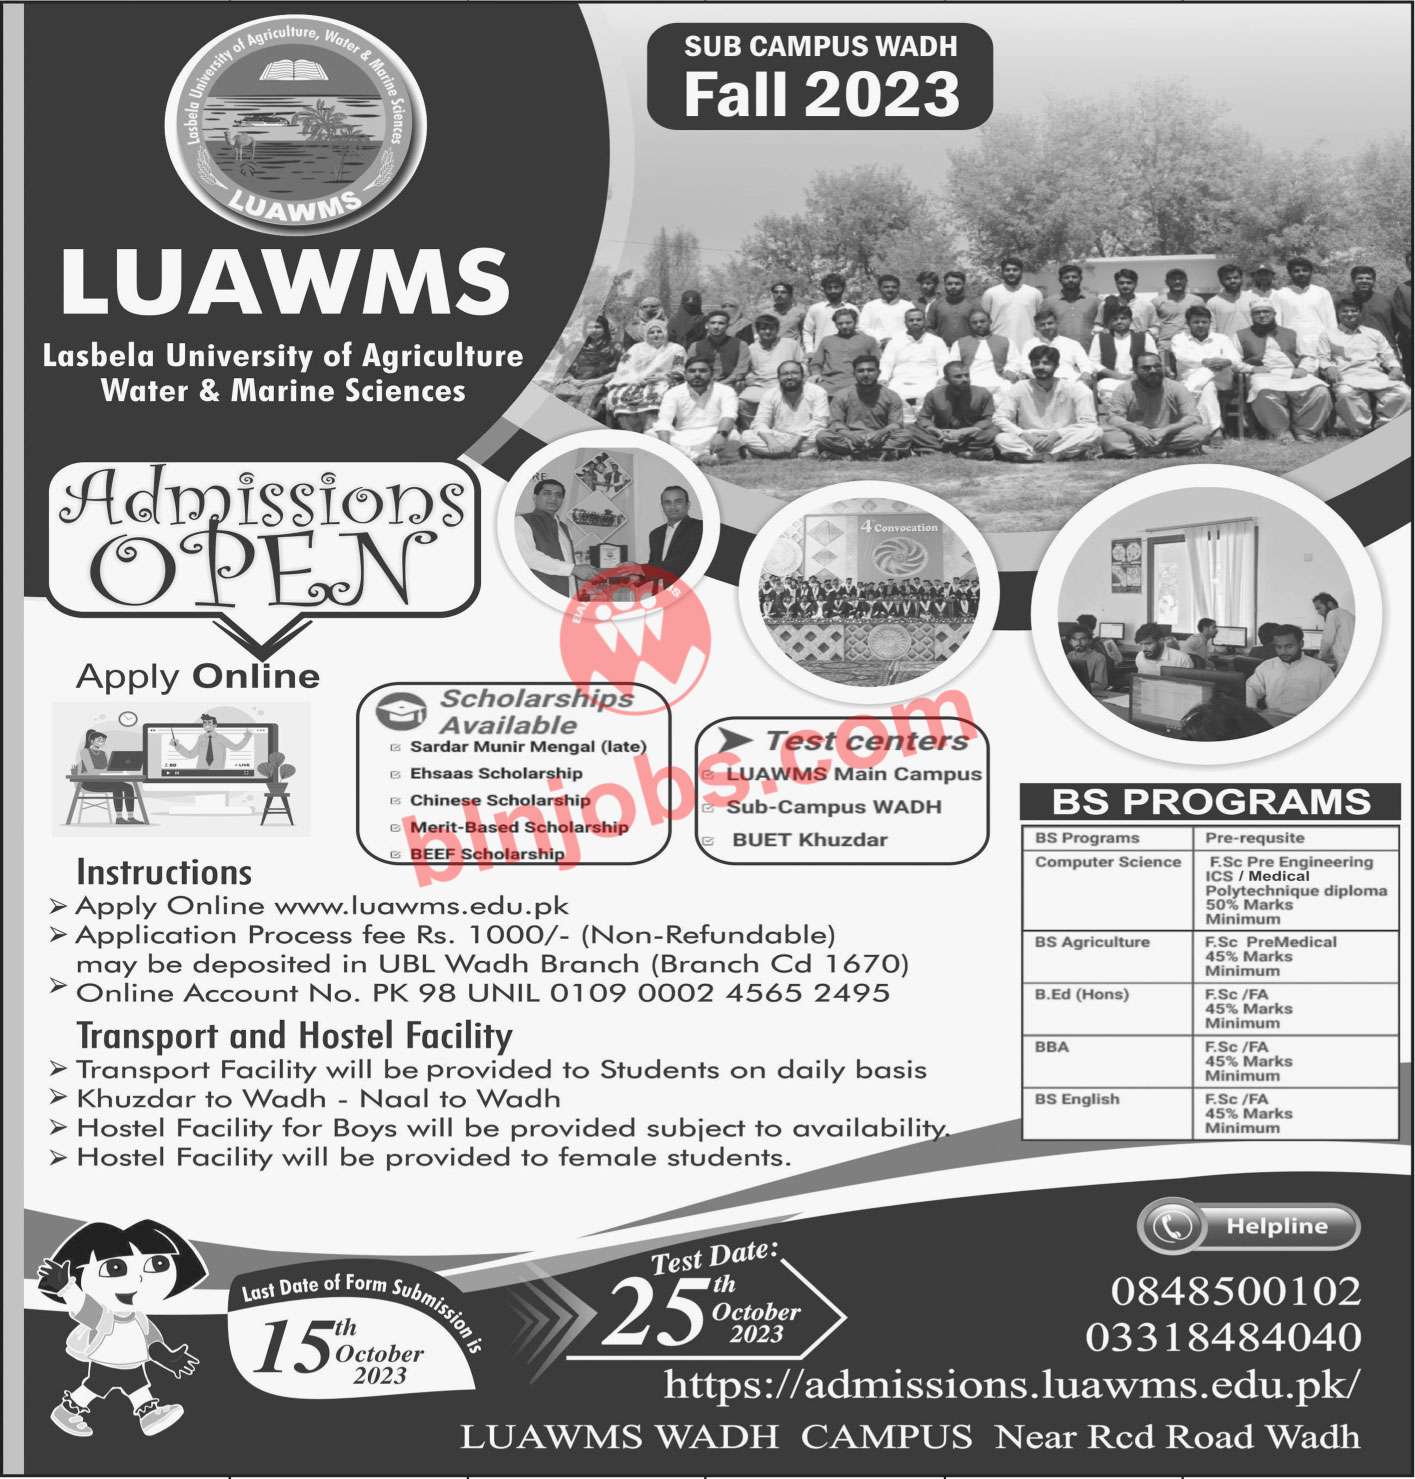 LUAWMS University Wadh Campus Admissions 2023